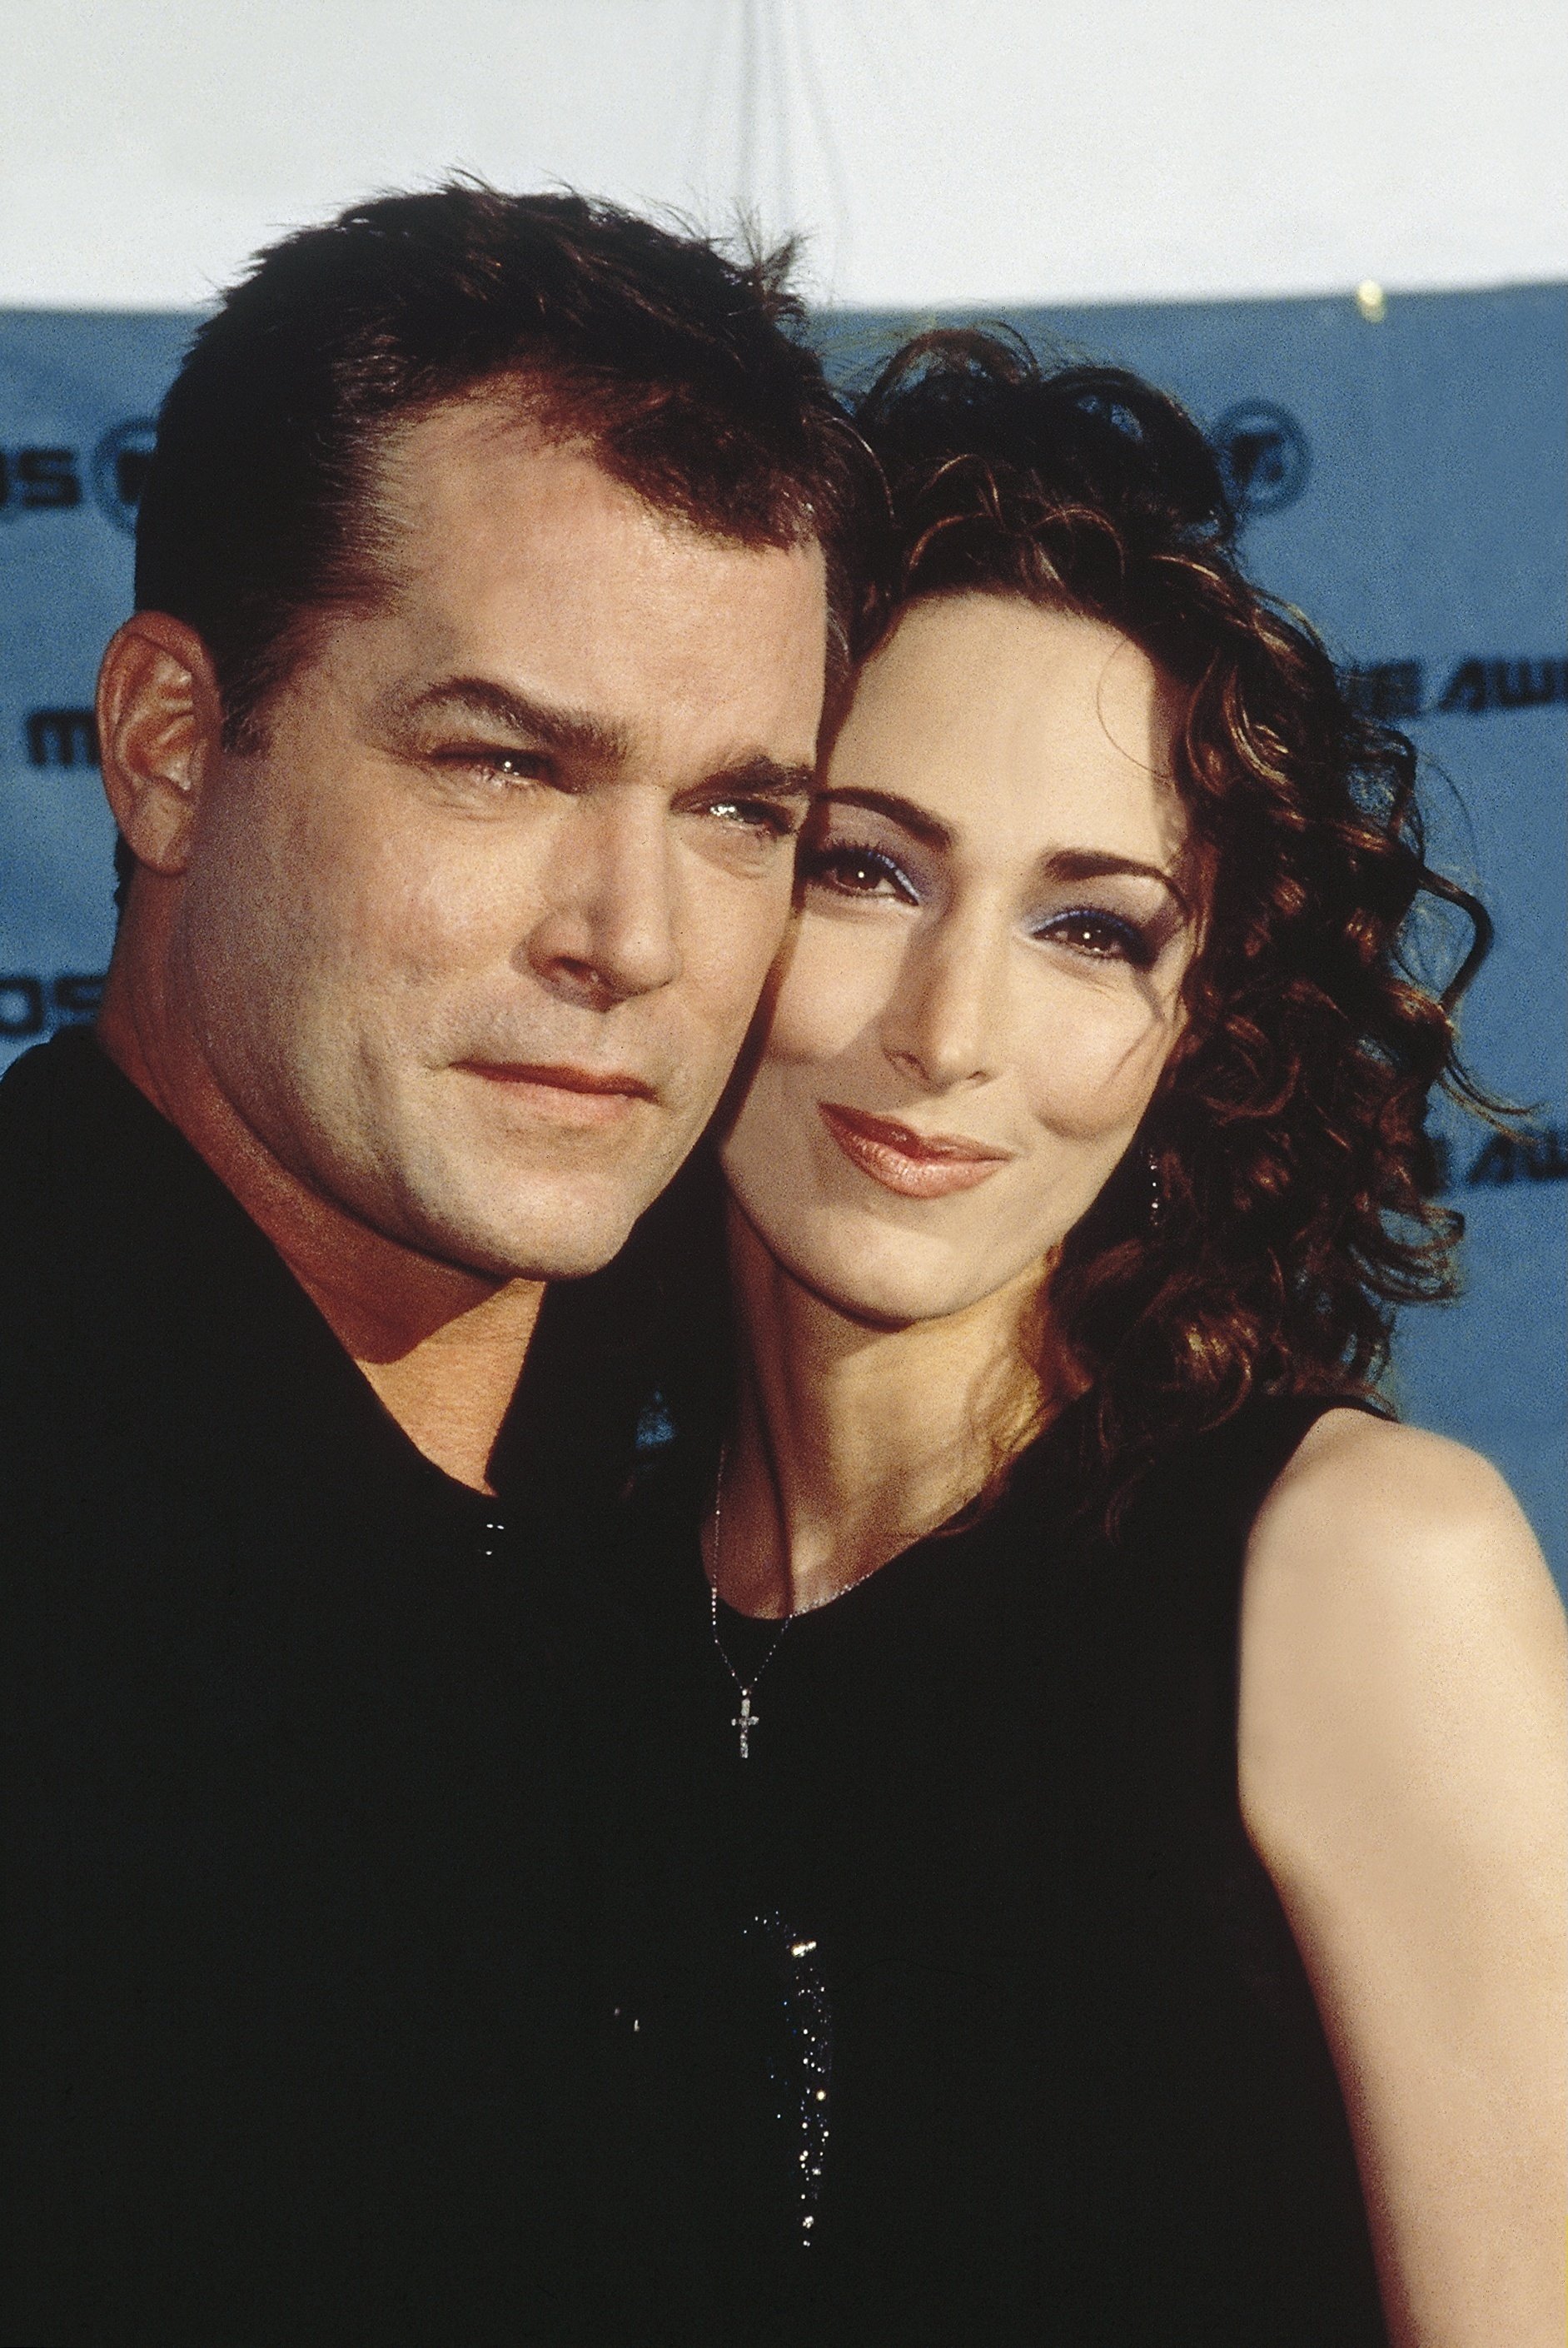  American actor Ray Liotta stands next to his ex-wife Michelle | Source: Getty Images